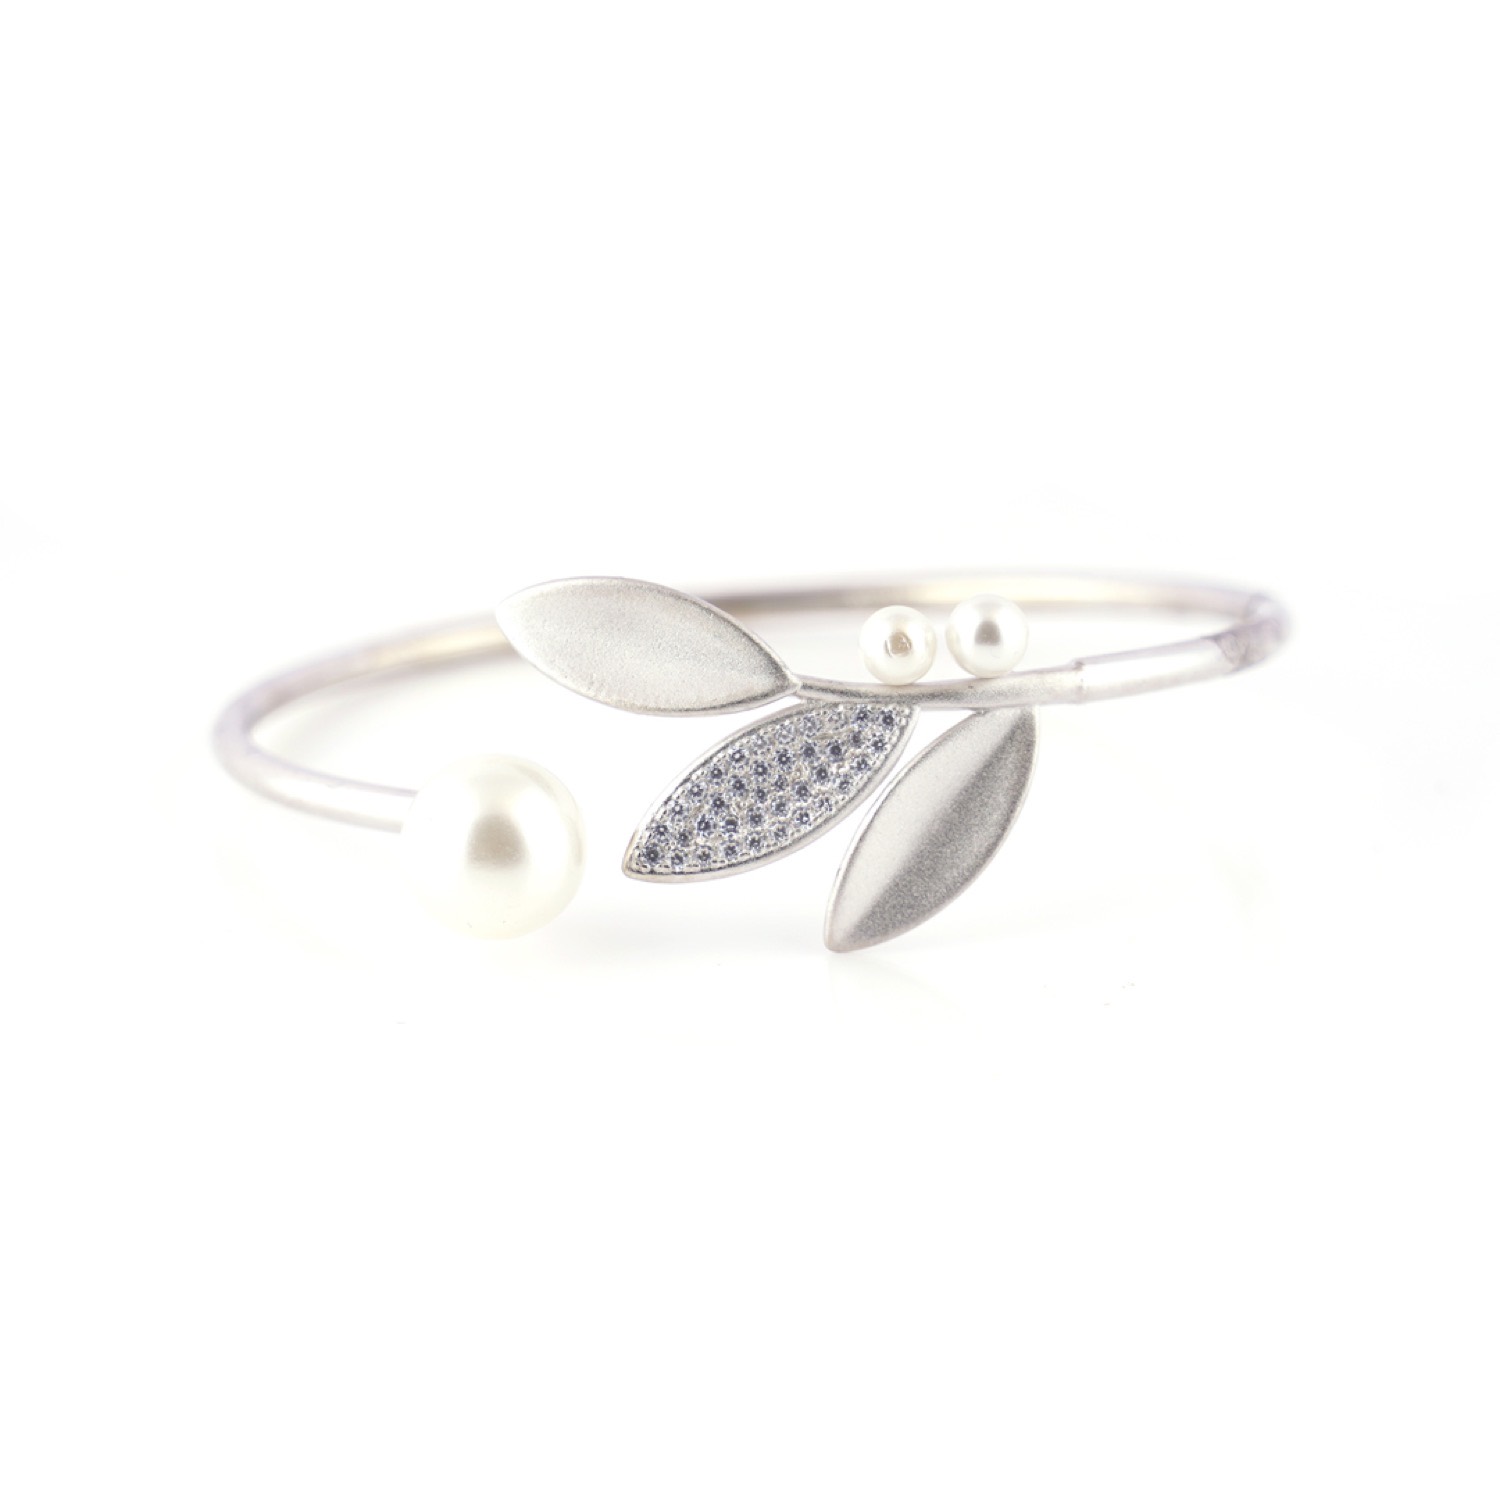 varam_bracelet_and_bangle_pearl_with_leaf_shaped_open_cuff_silver_bracelet-1